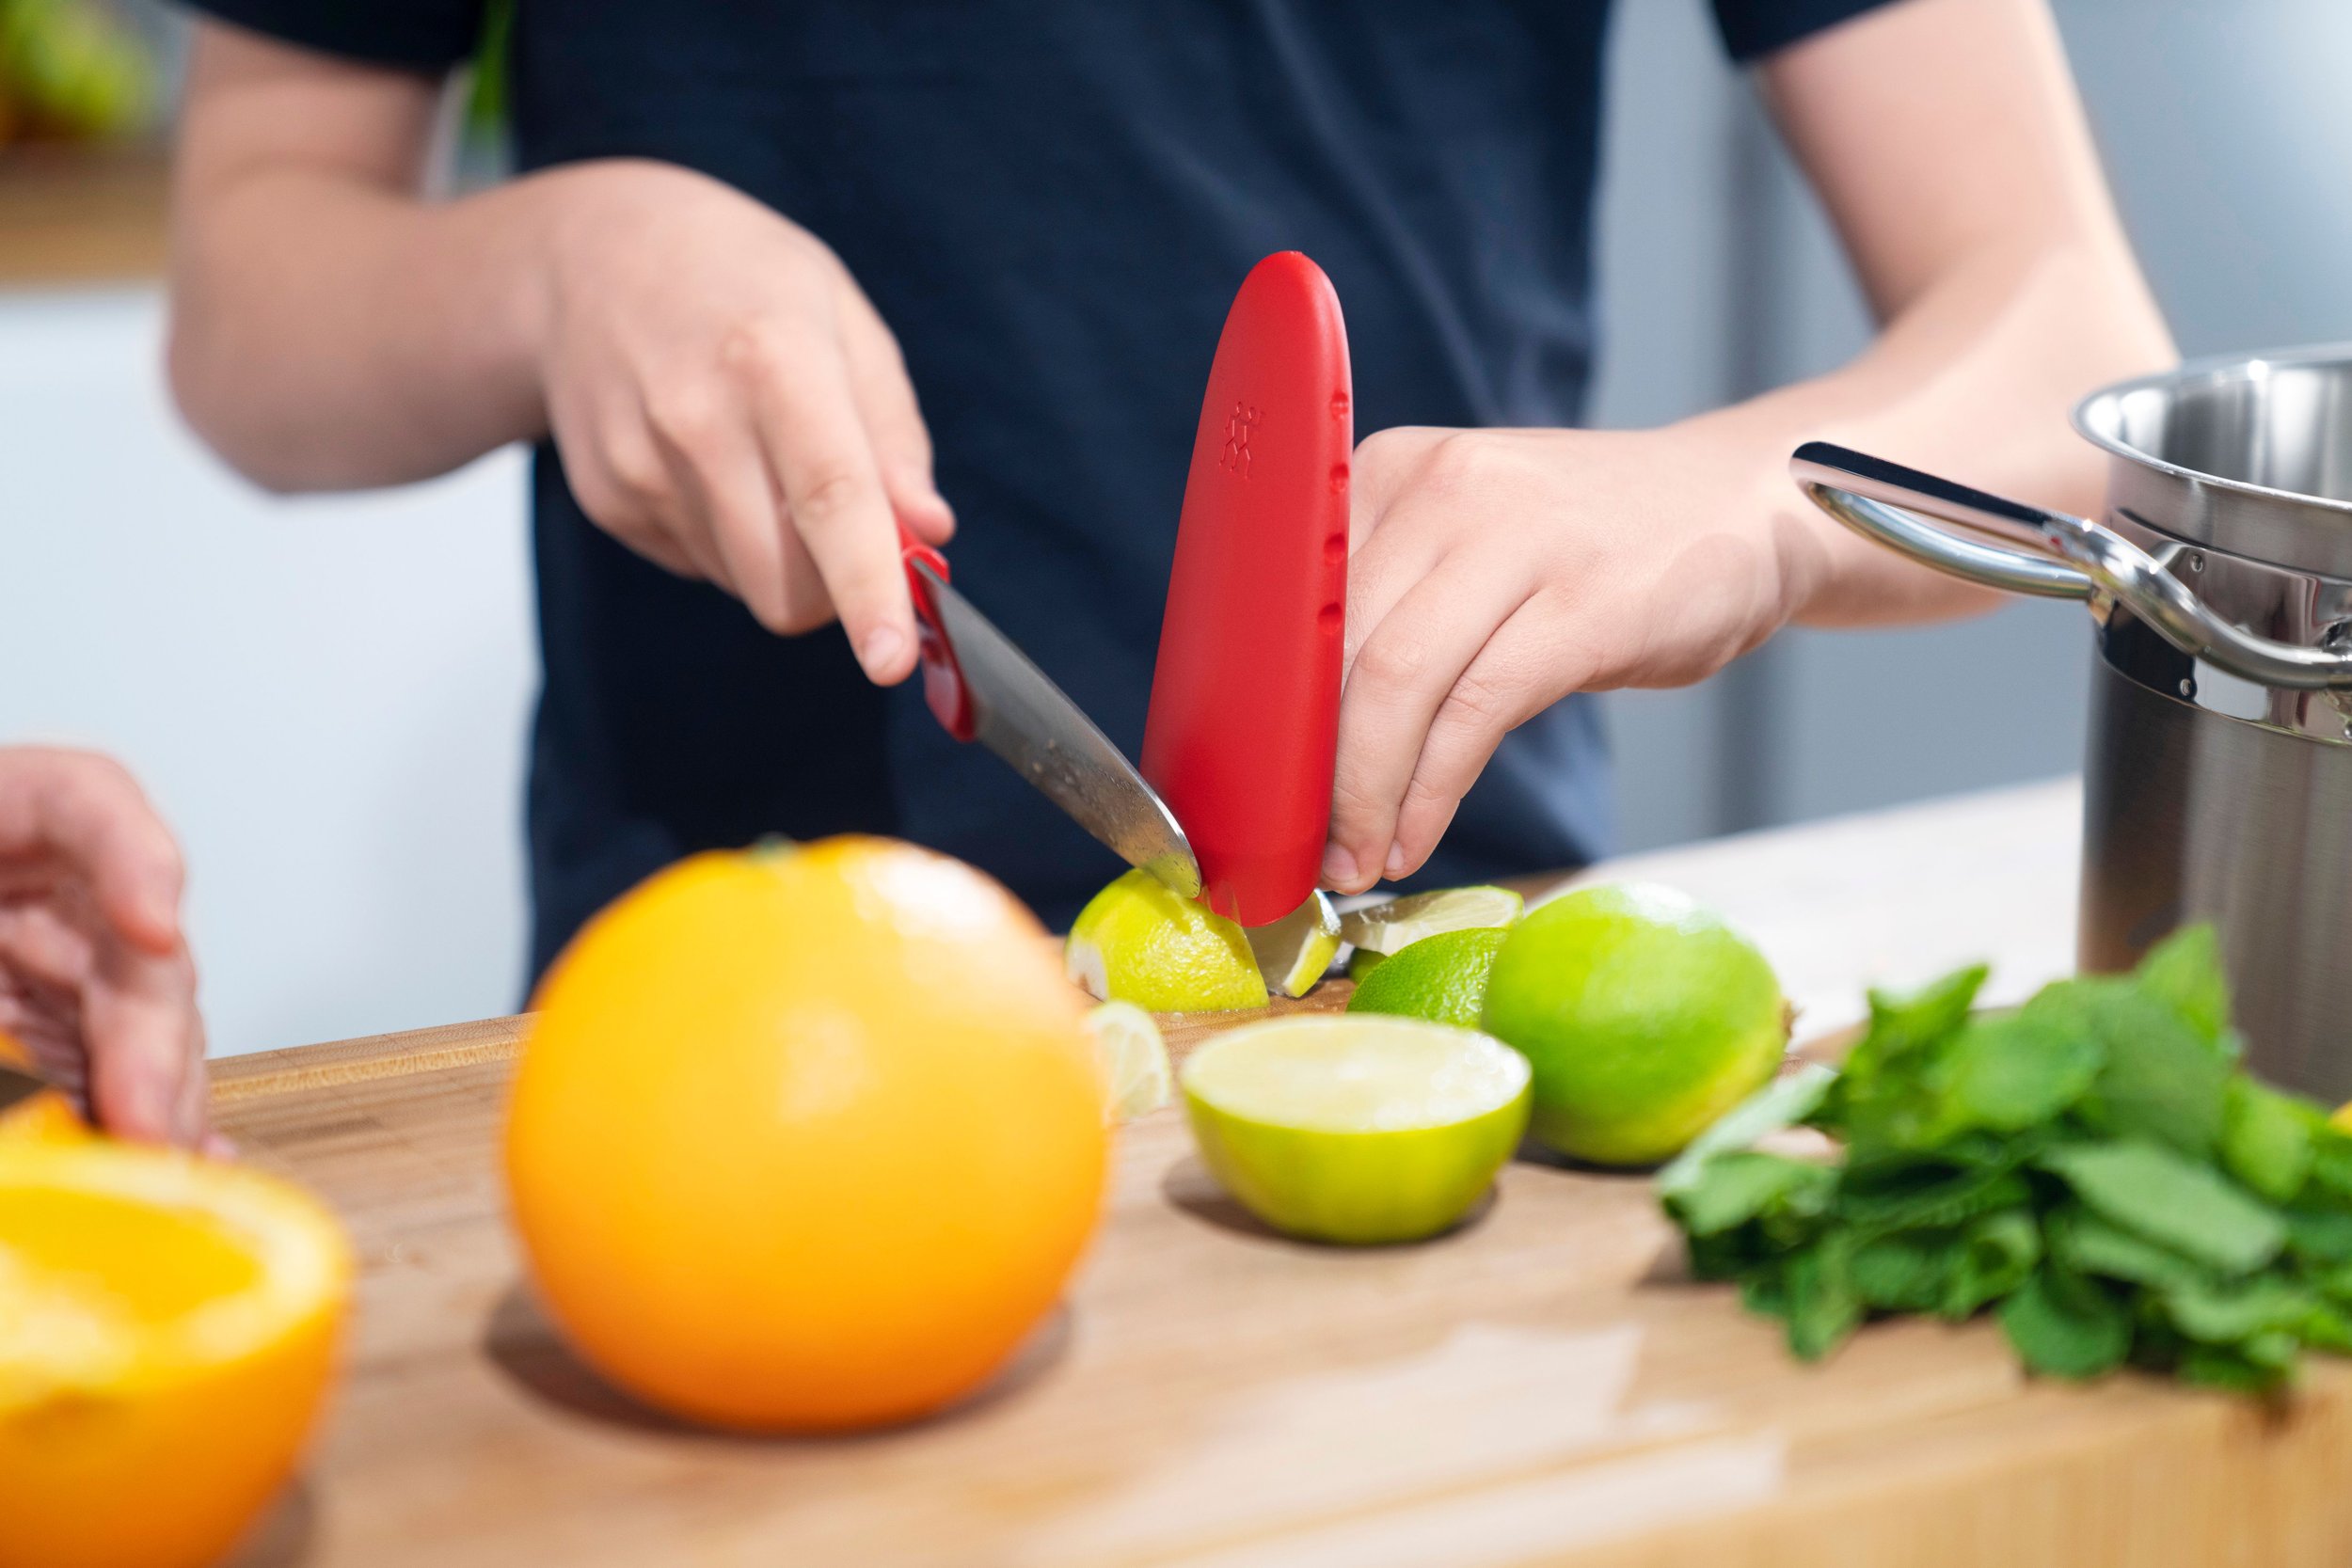 Twinny! The new children's chef knife by ZWILLING! — Grand Fête